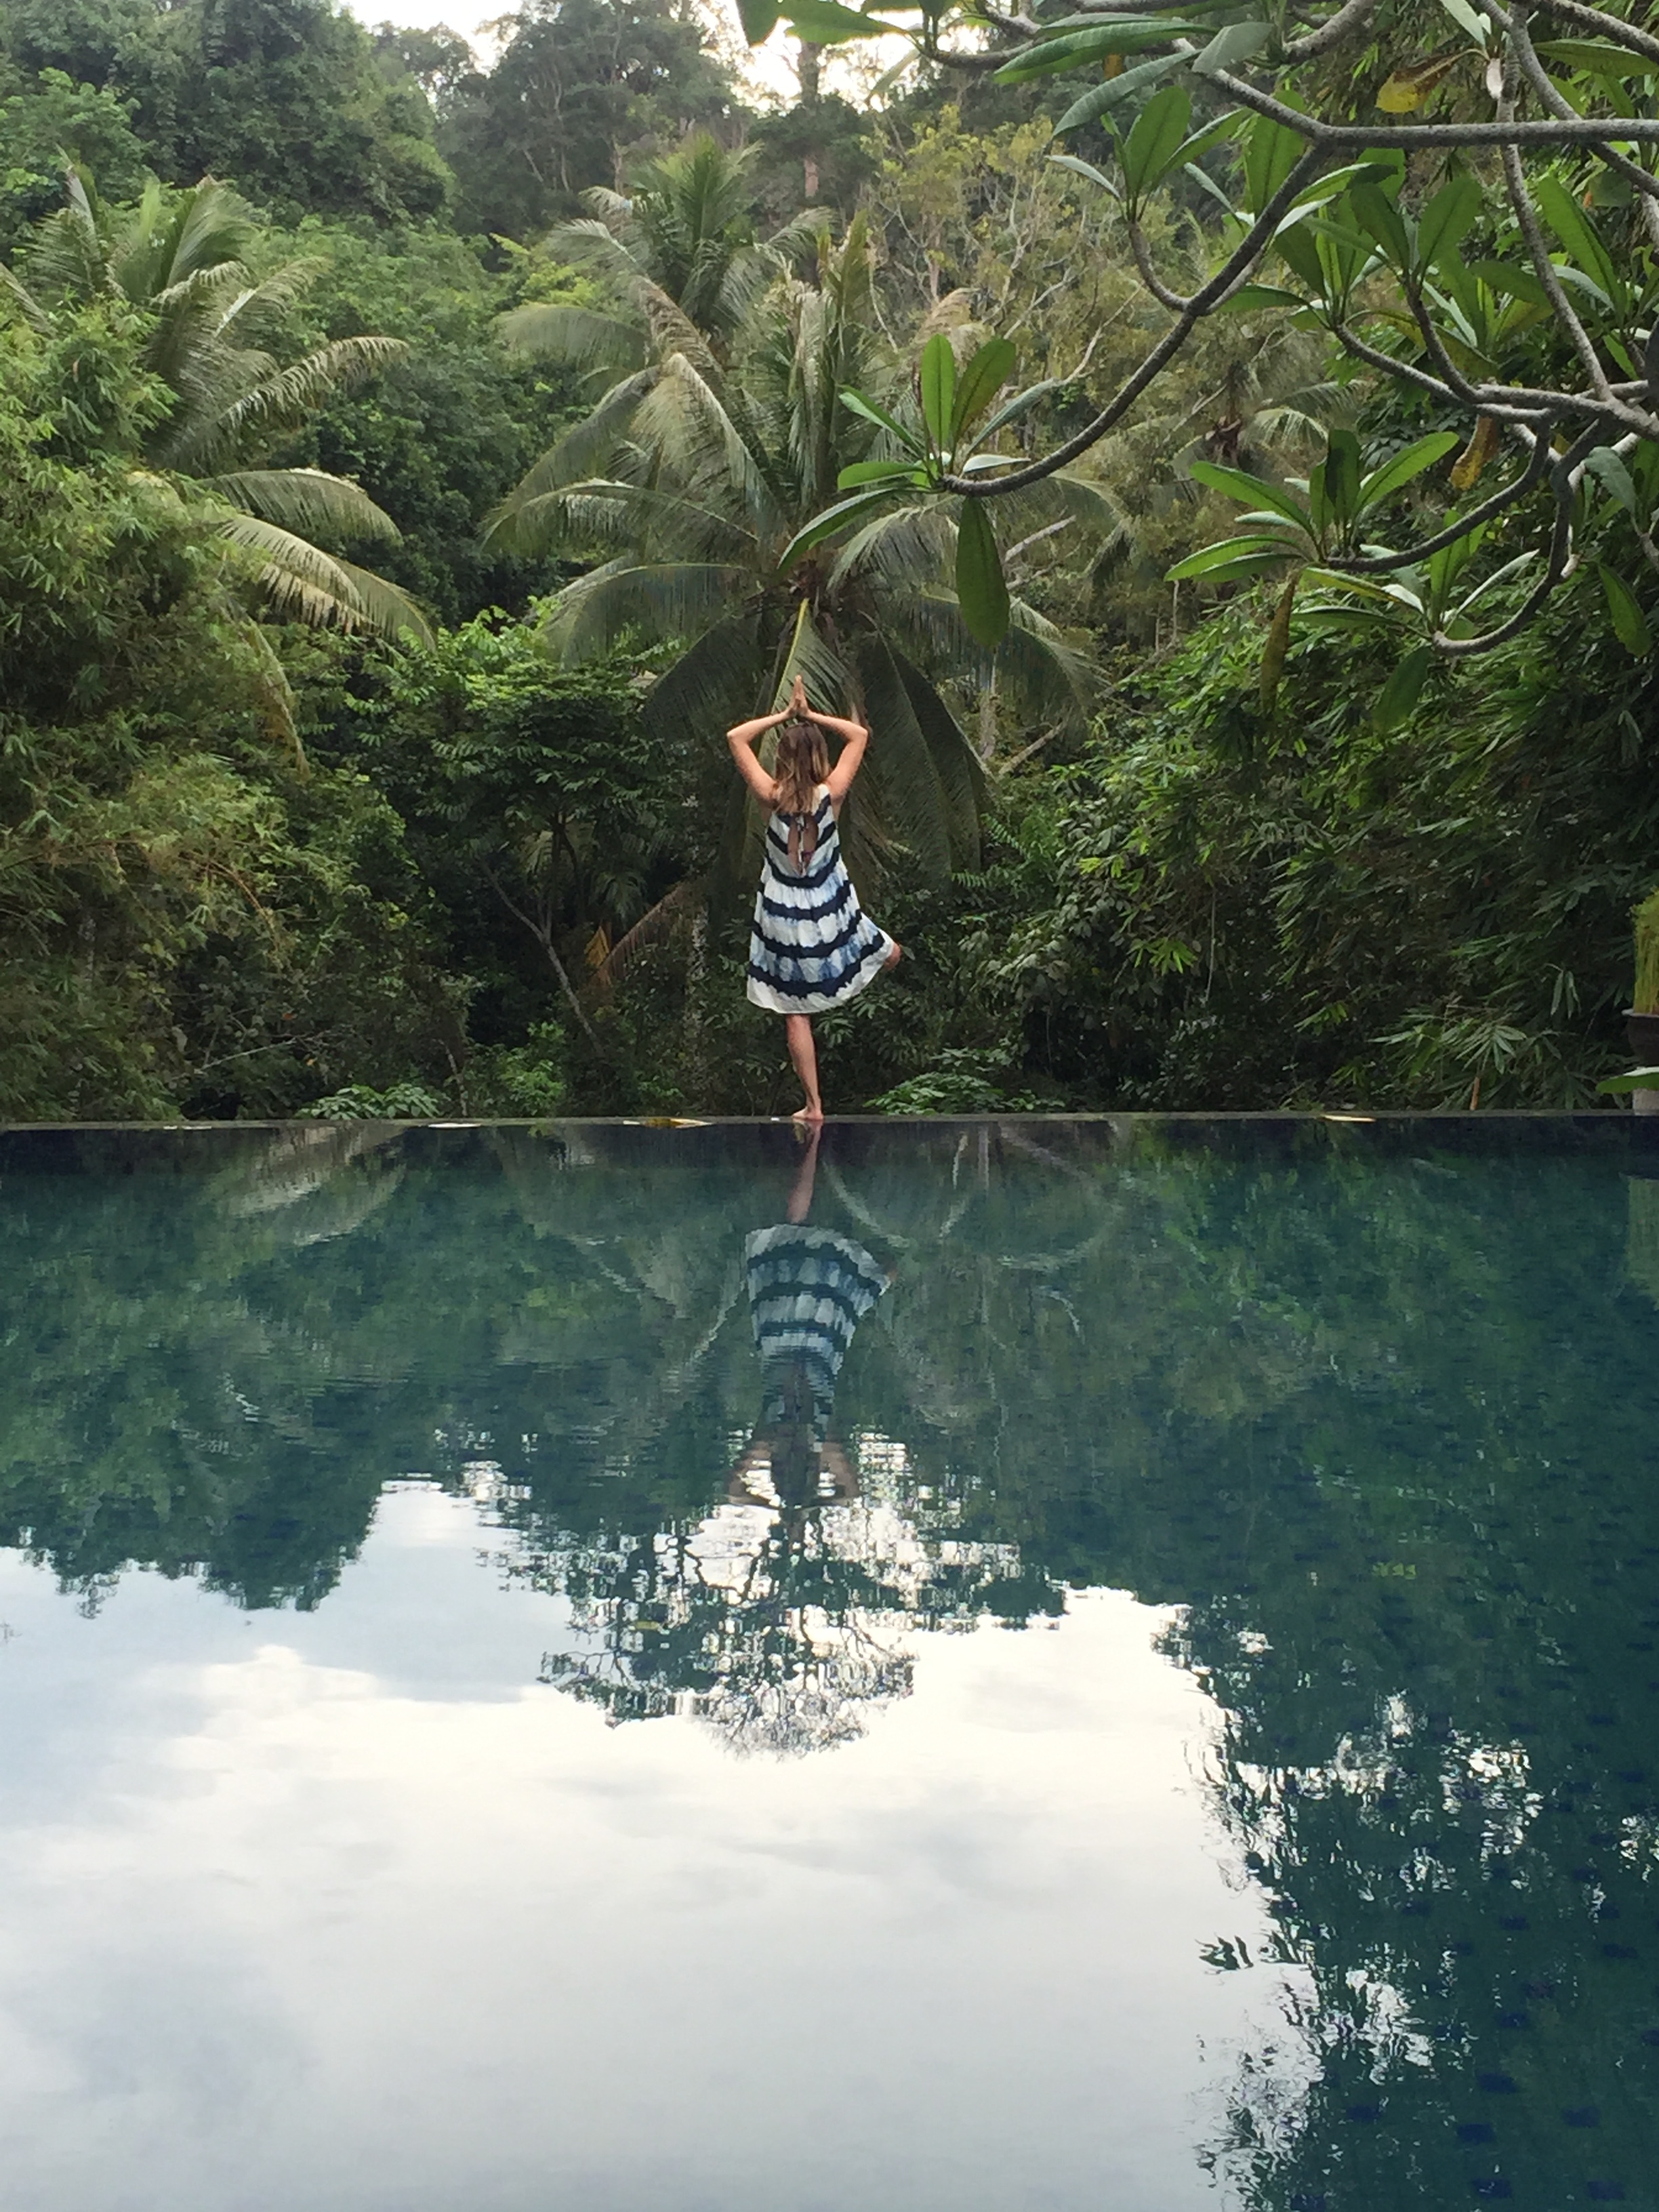 Meditation time. Balance yourself &amp; breathe in that jungle view